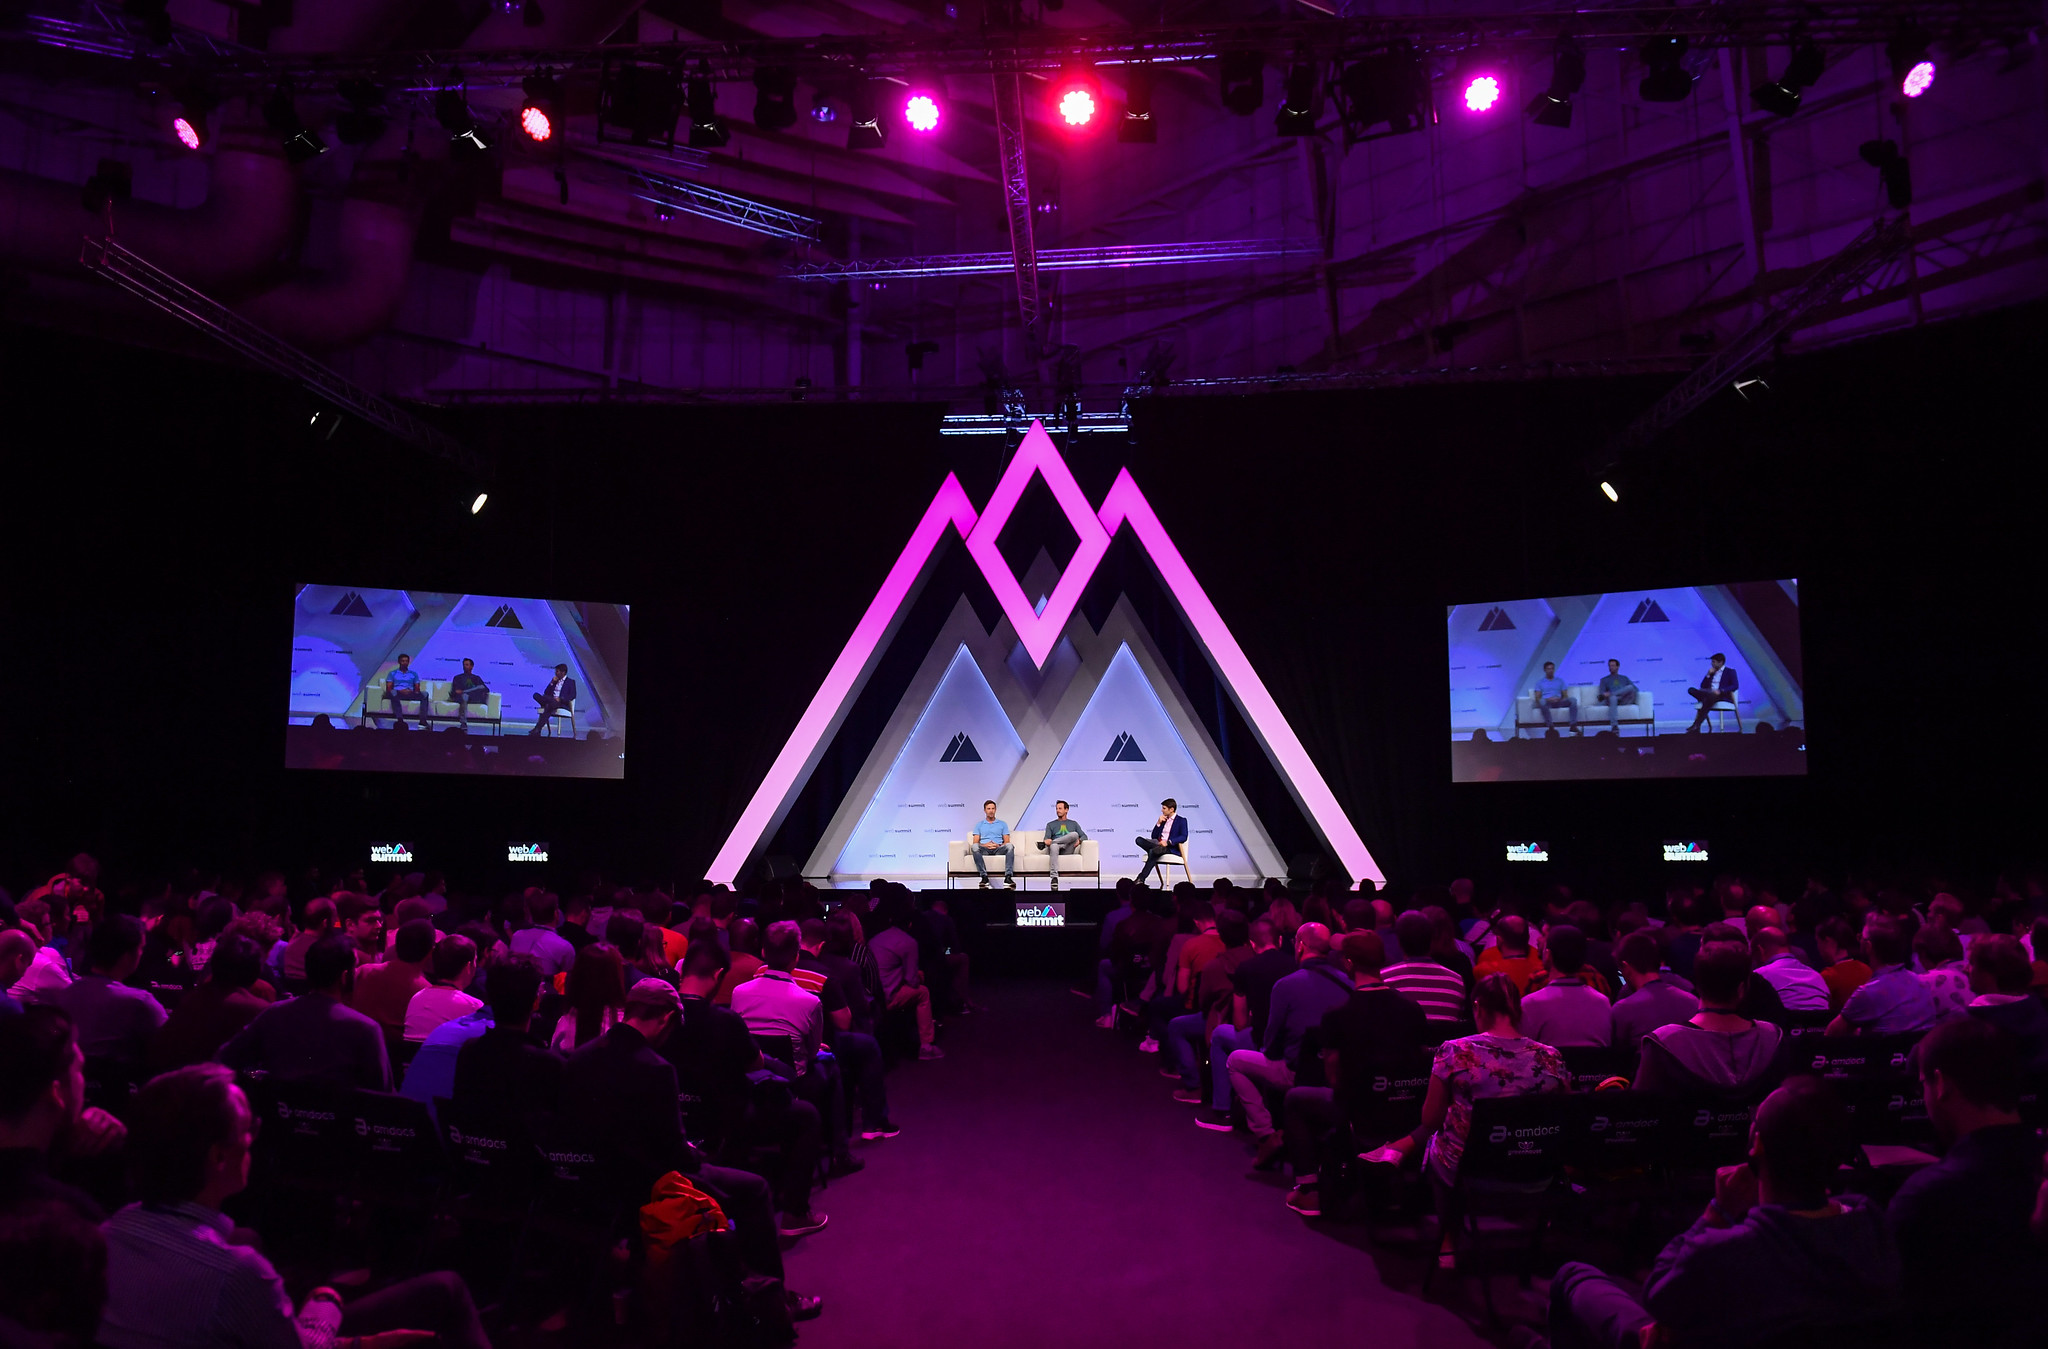 FullSTK Stage during the final day of Web Summit 2019 at the Altice Arena in Lisbon, Portugal